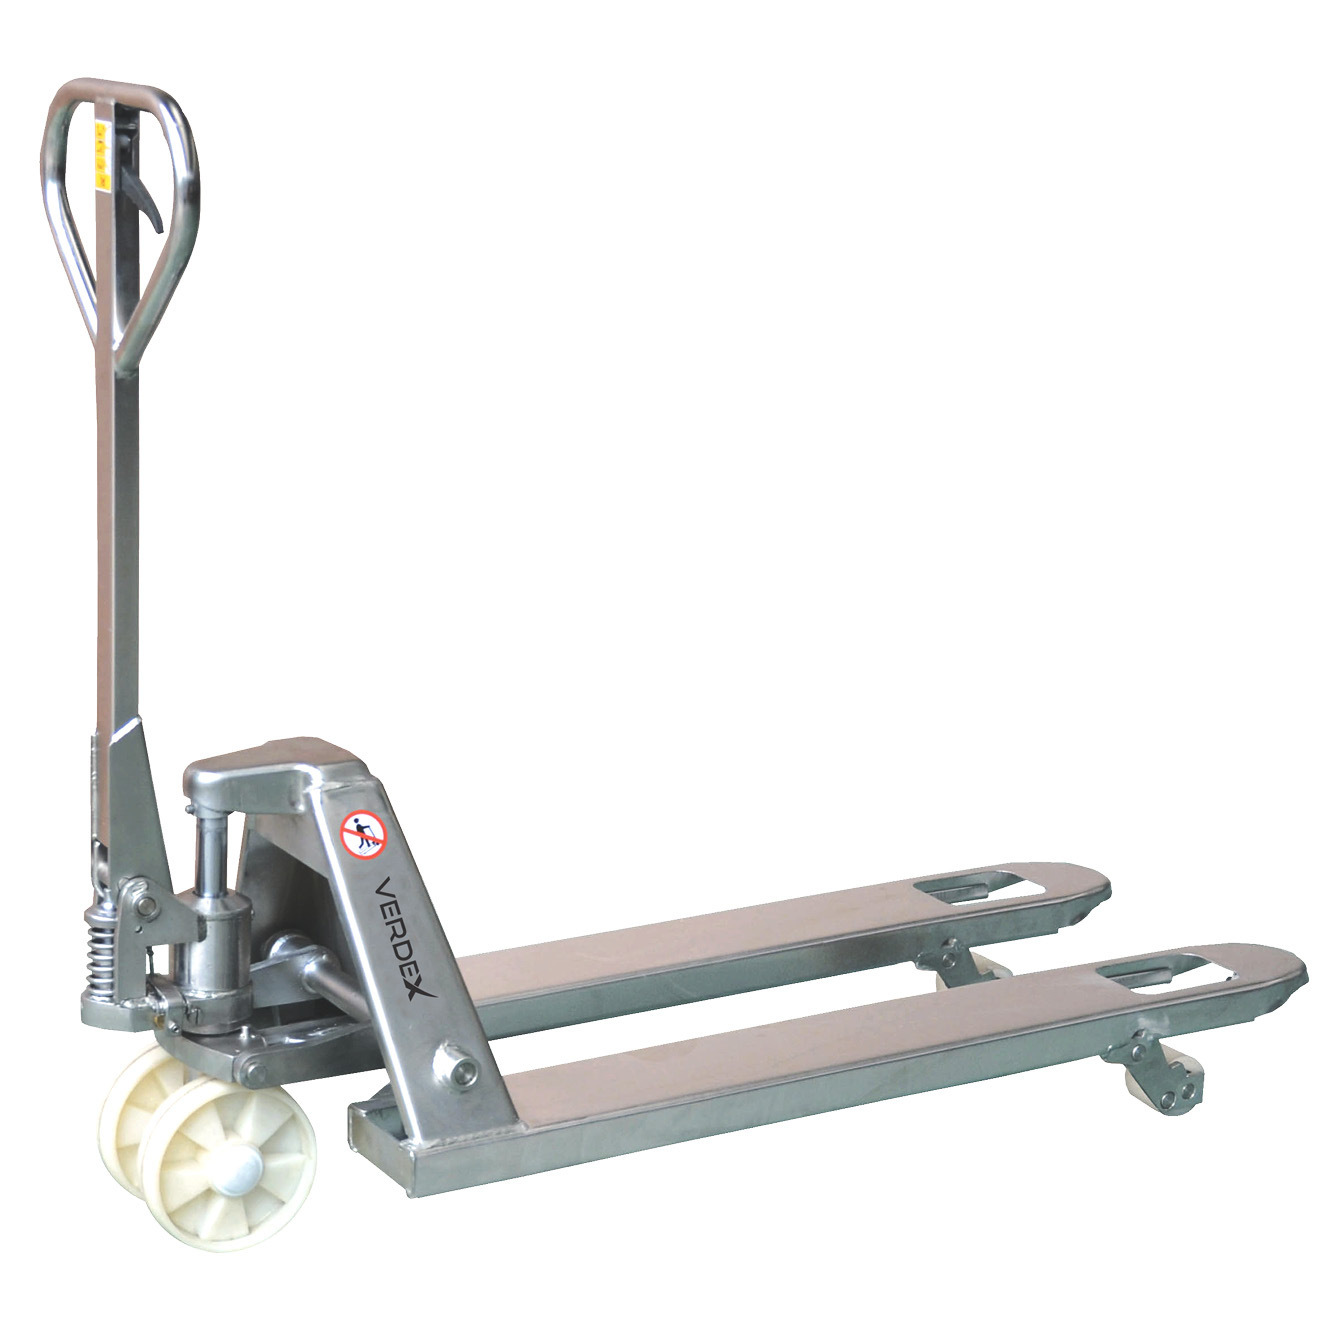 Stainless Steel Pallet Truck (Euro Size 520mm wide)